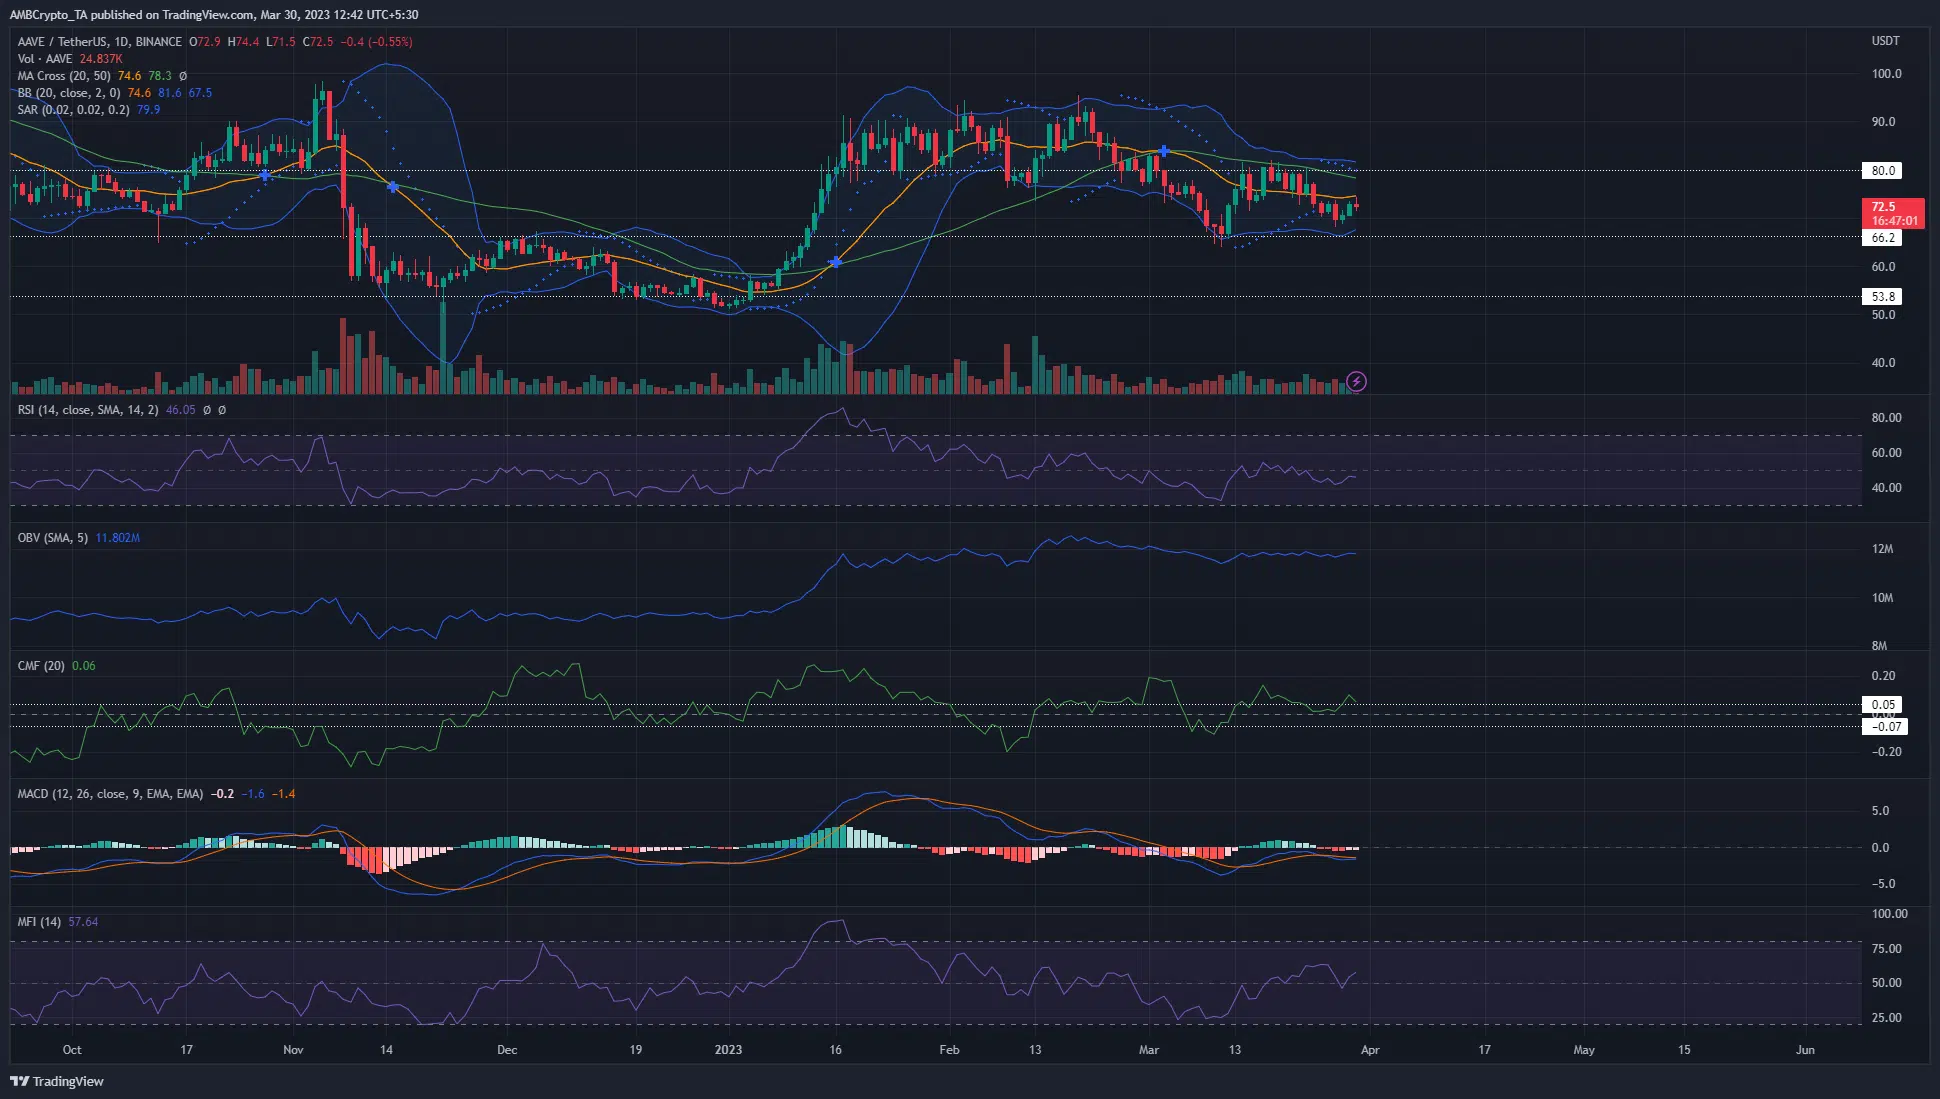 Aave [AAVE] Price Analysis: 30 March